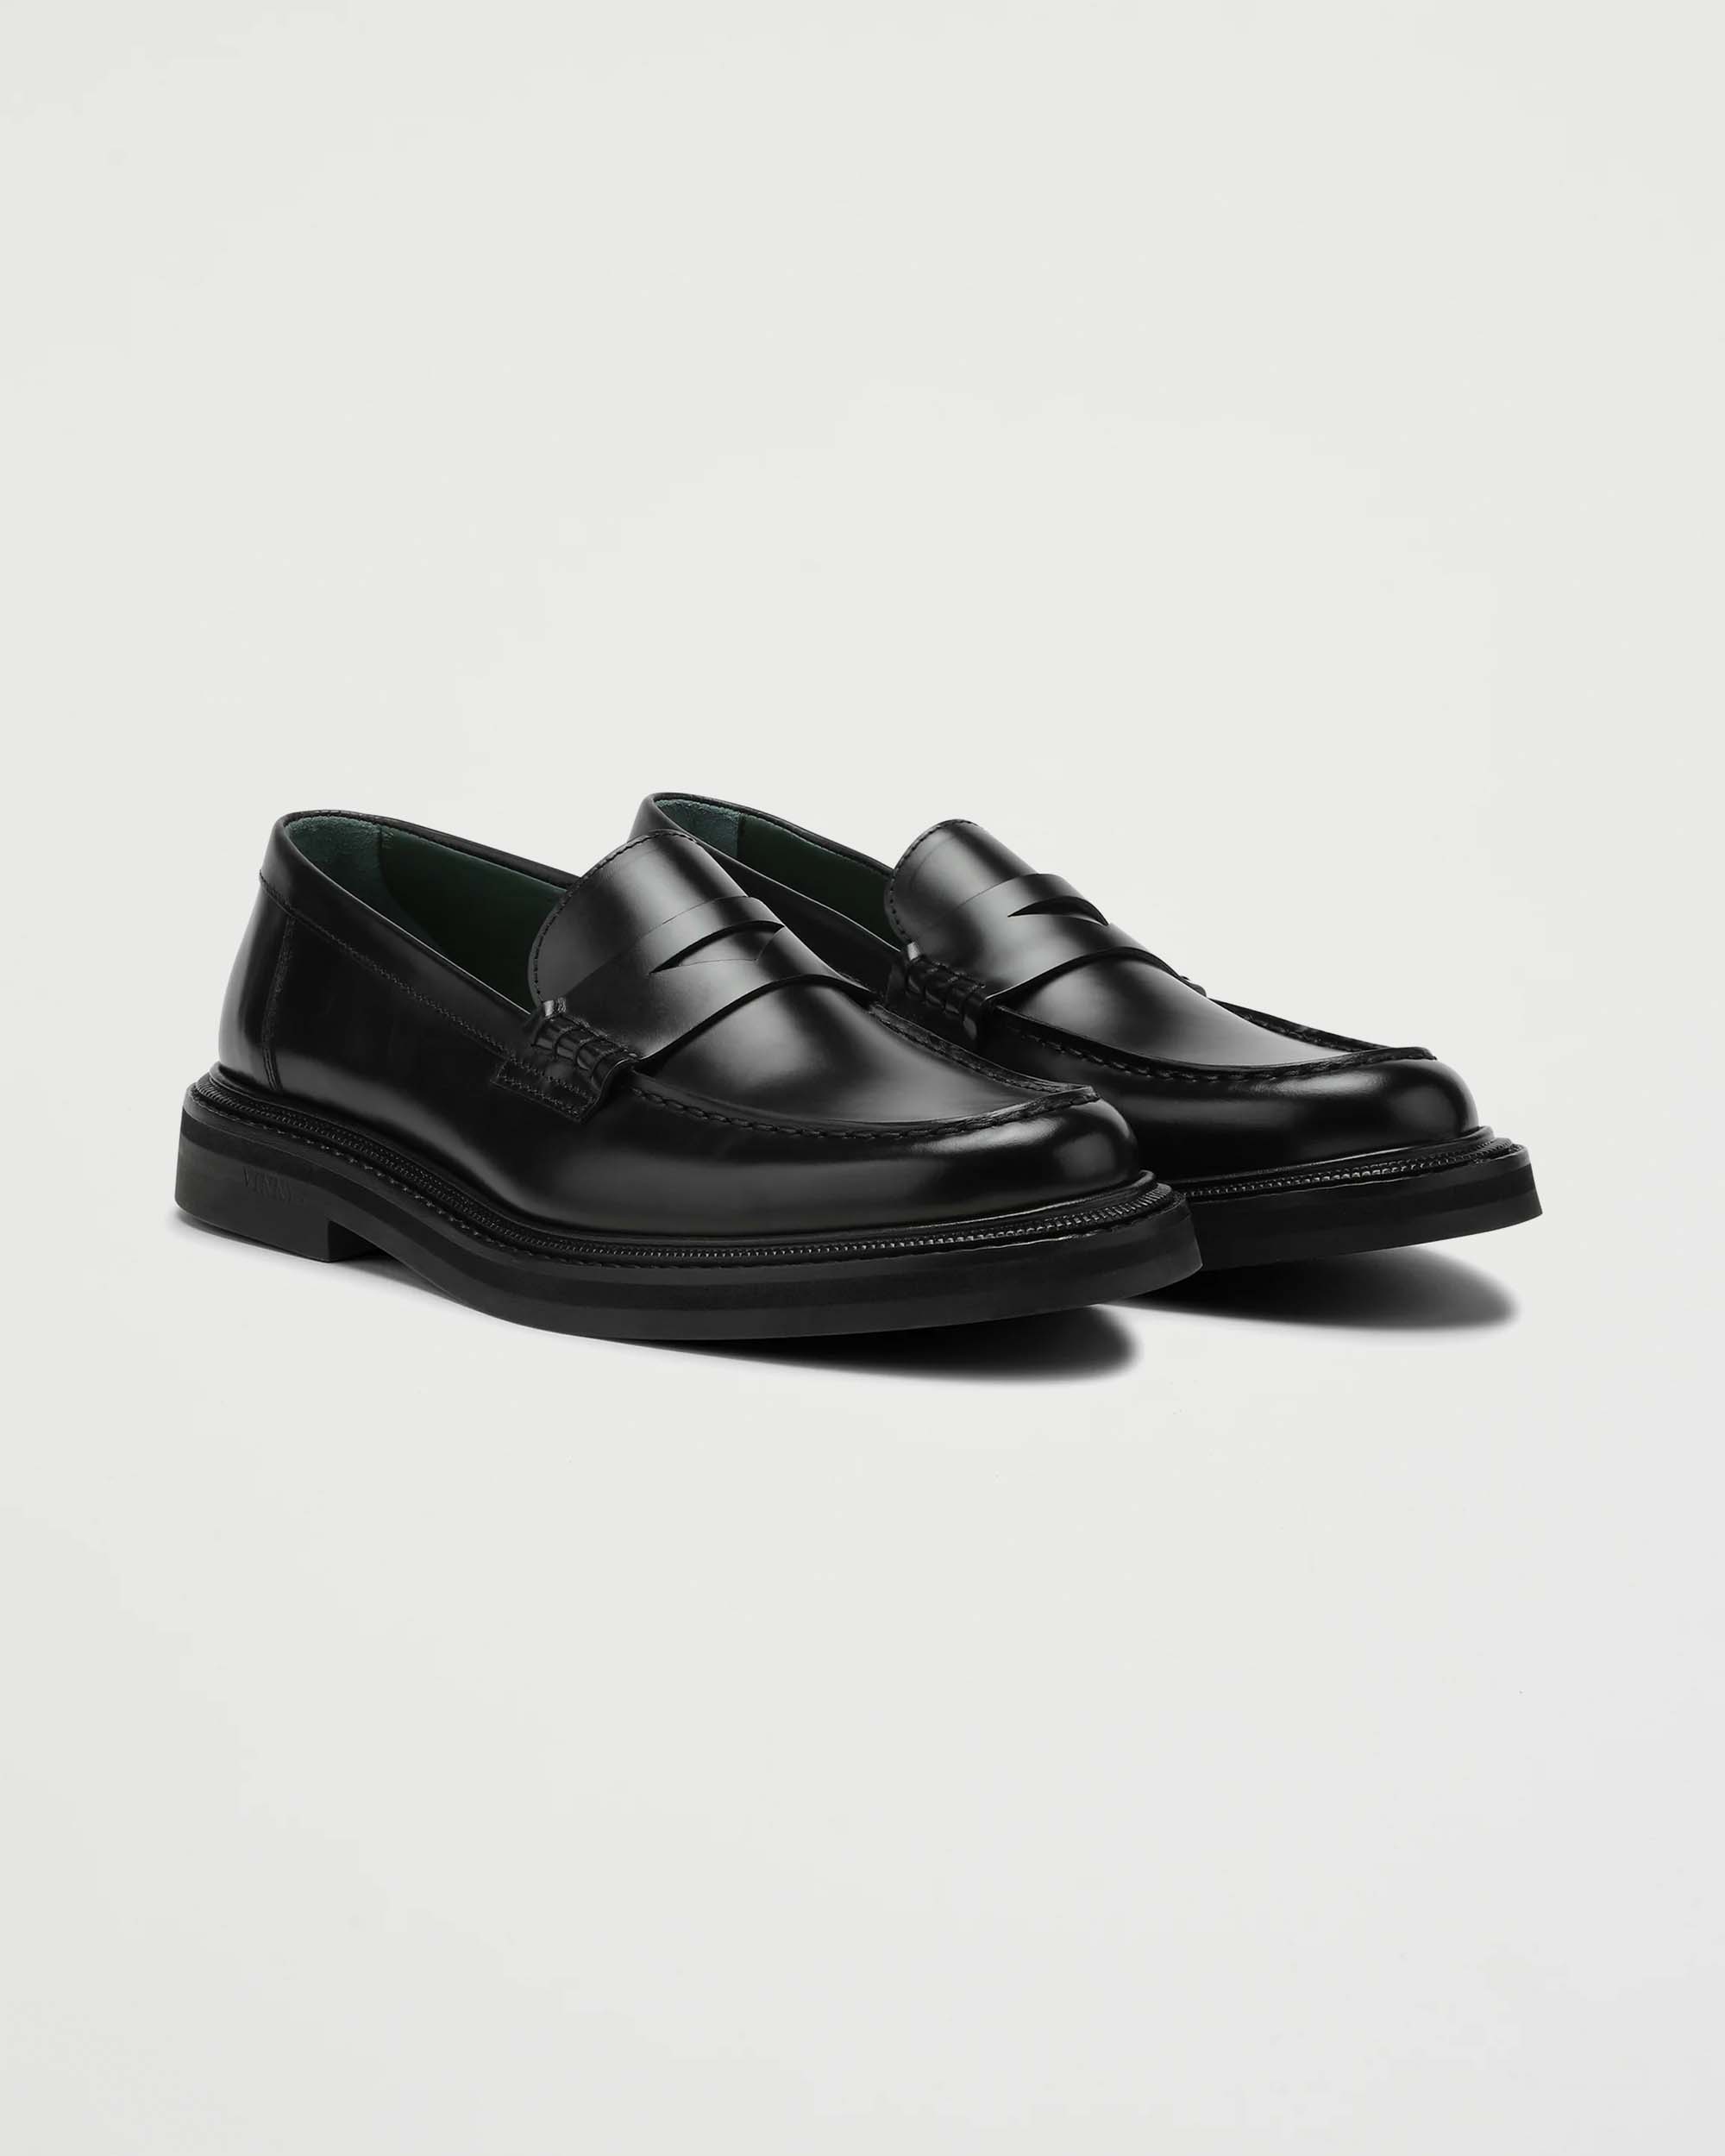 VINNY's Vinnee Penny Loafer Black Polido Leather Shoes Leather Unisex